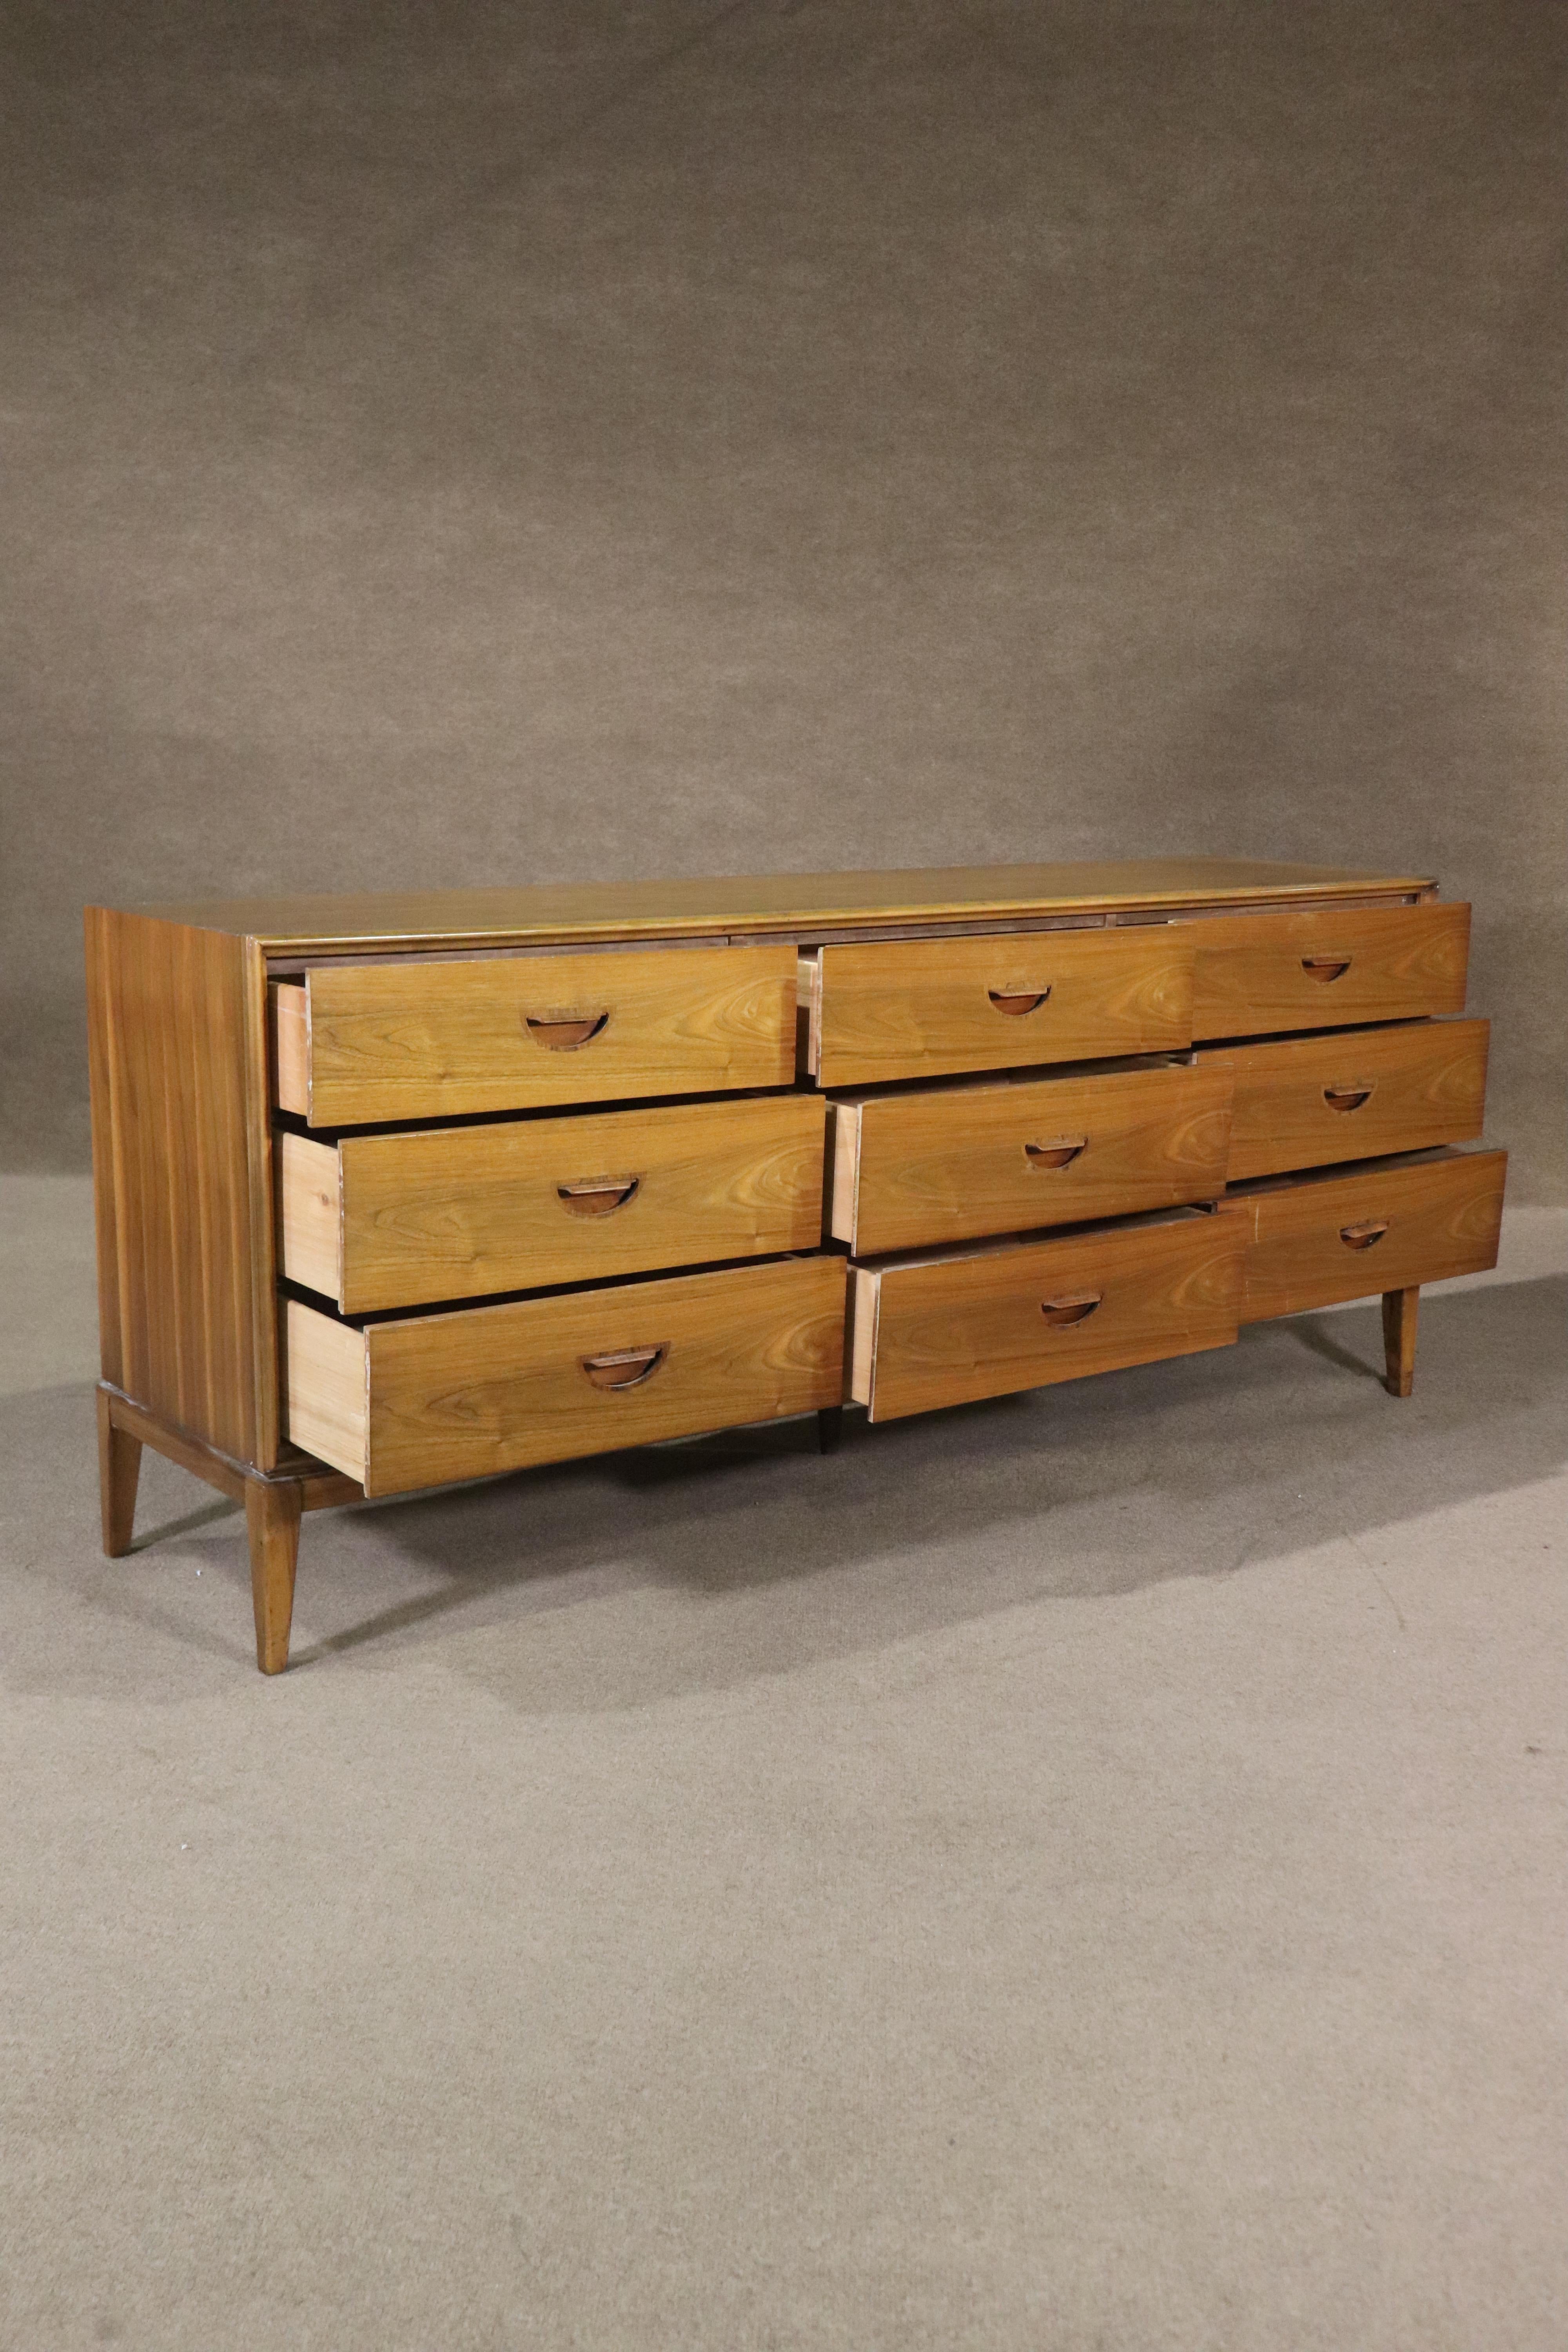 Mid-century modern long chest of drawers in stunning walnut wood grain with sculpted inset rosewood handles. Nine drawers set on tapered legs. Very simple but unique vintage design.
Please confirm location NY or NJ